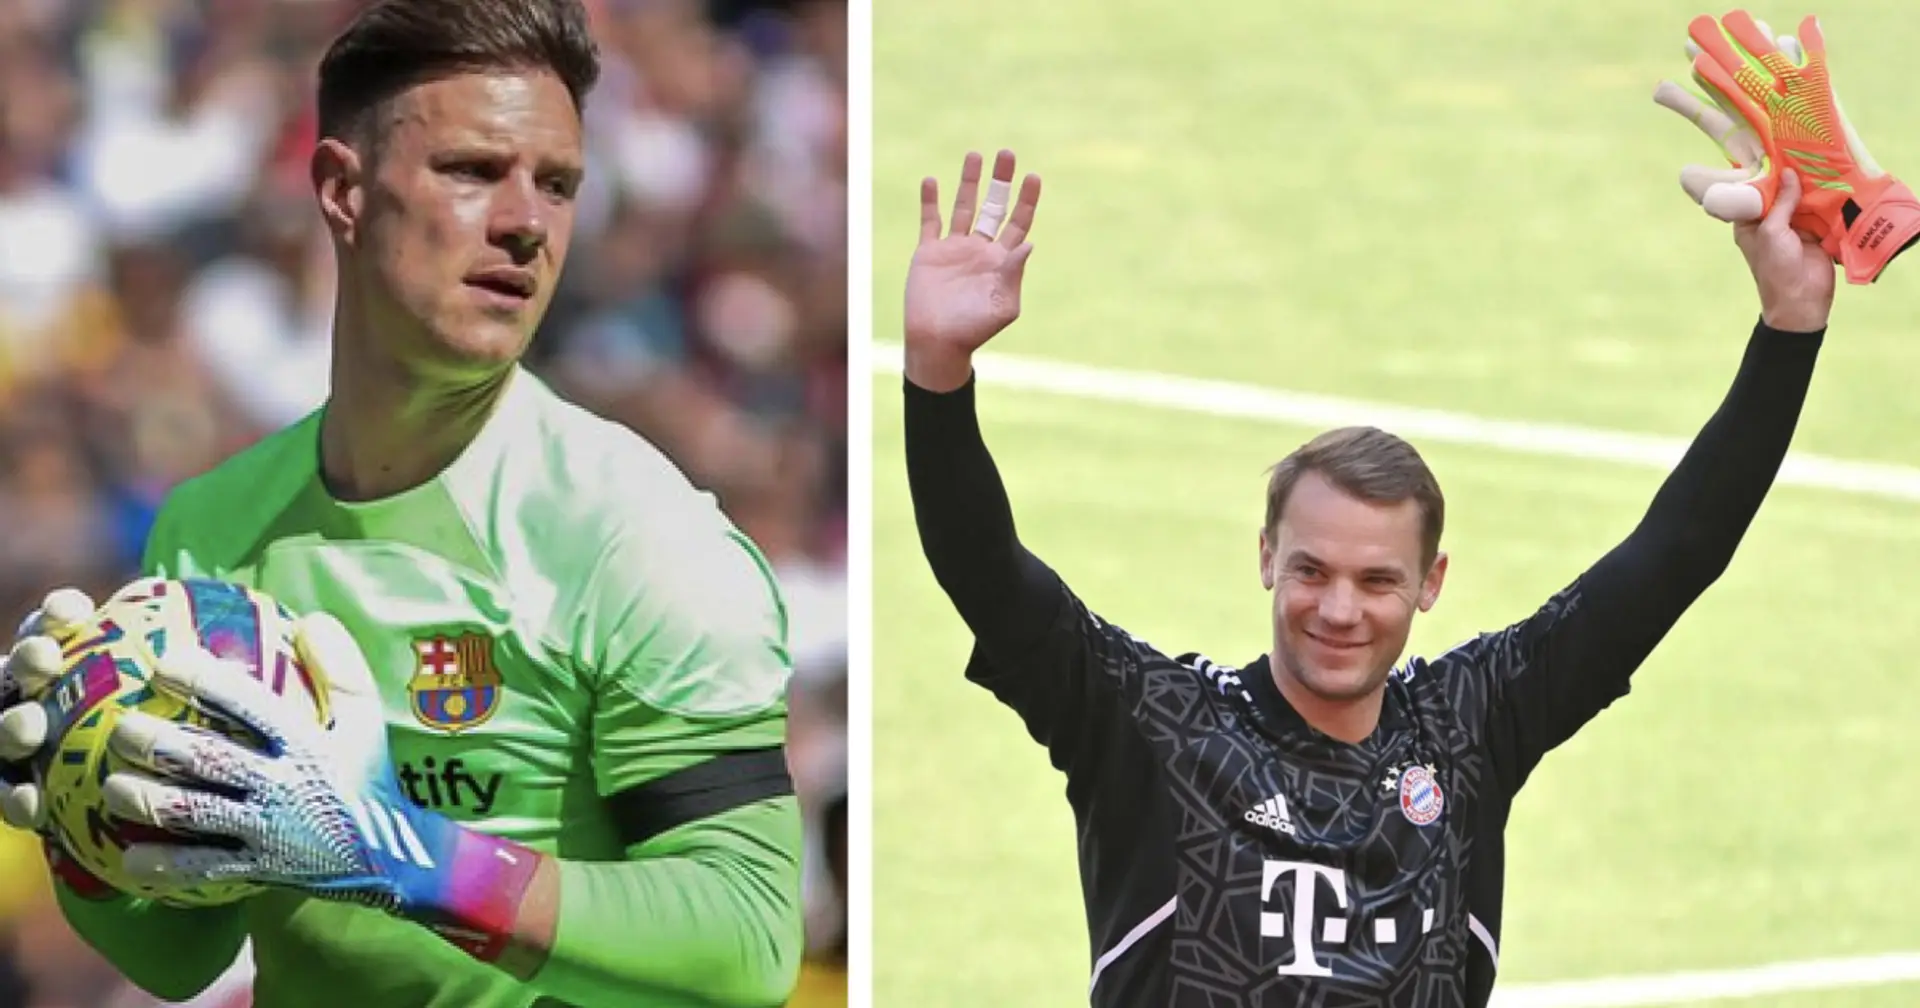 Manuel Neuer back to football – what it means for Ter Stegen